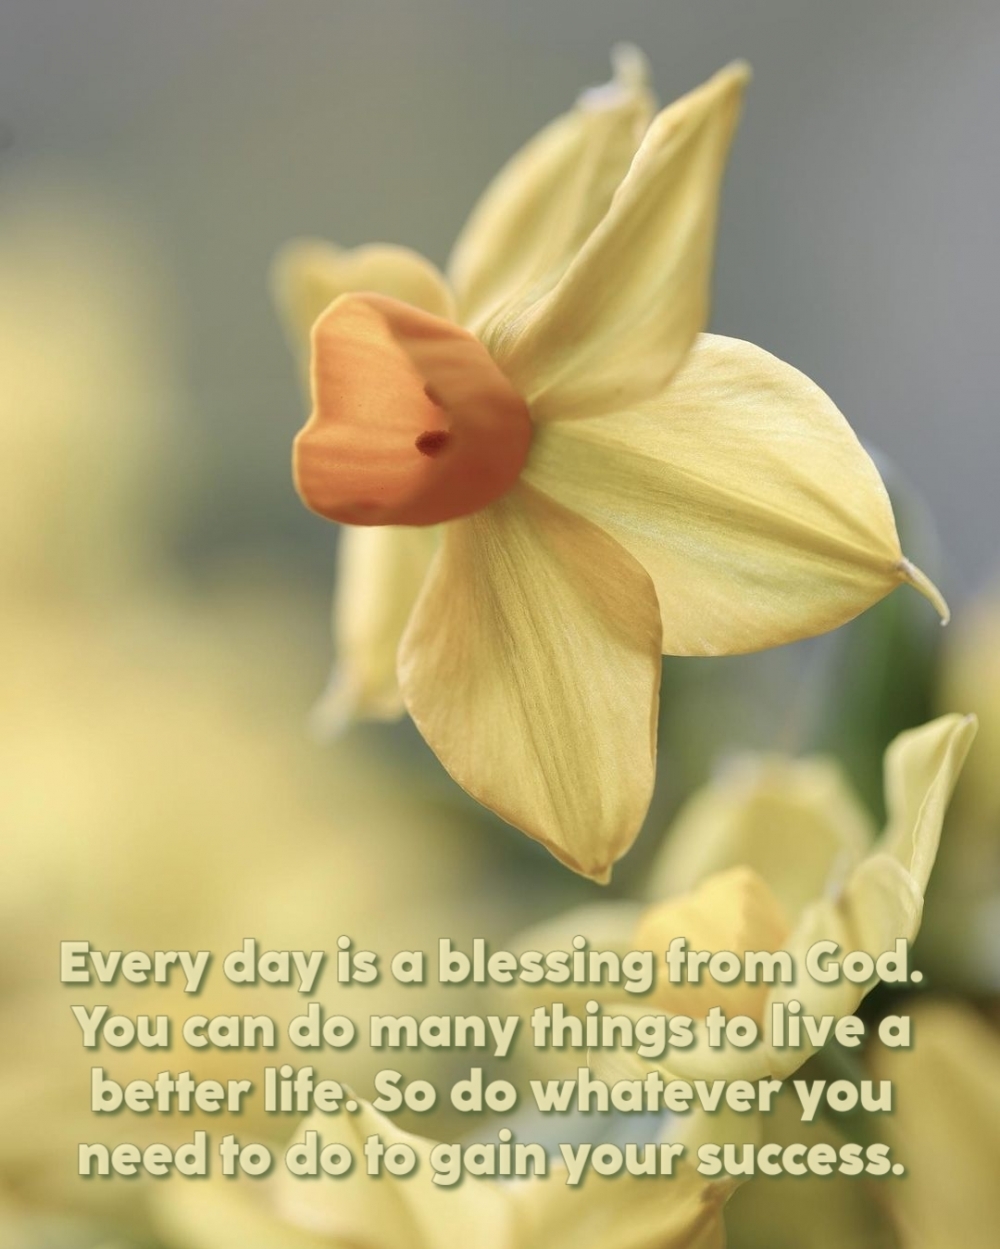 Every day is a blessing from God.